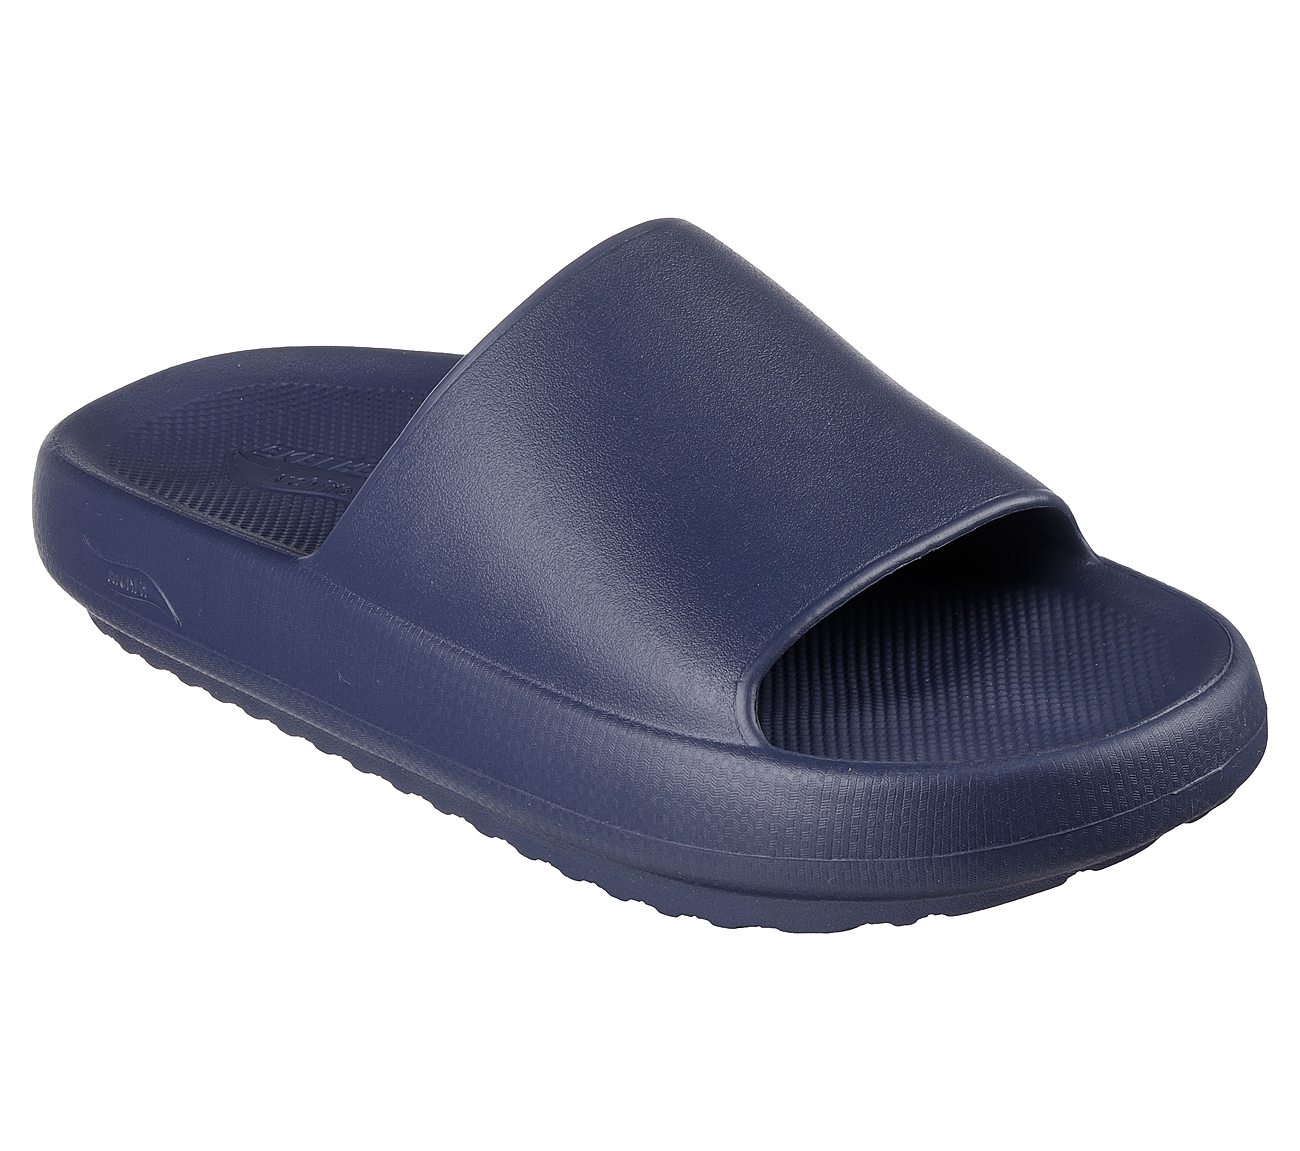 ARCH FIT HORIZON, SLATE Footwear Right View